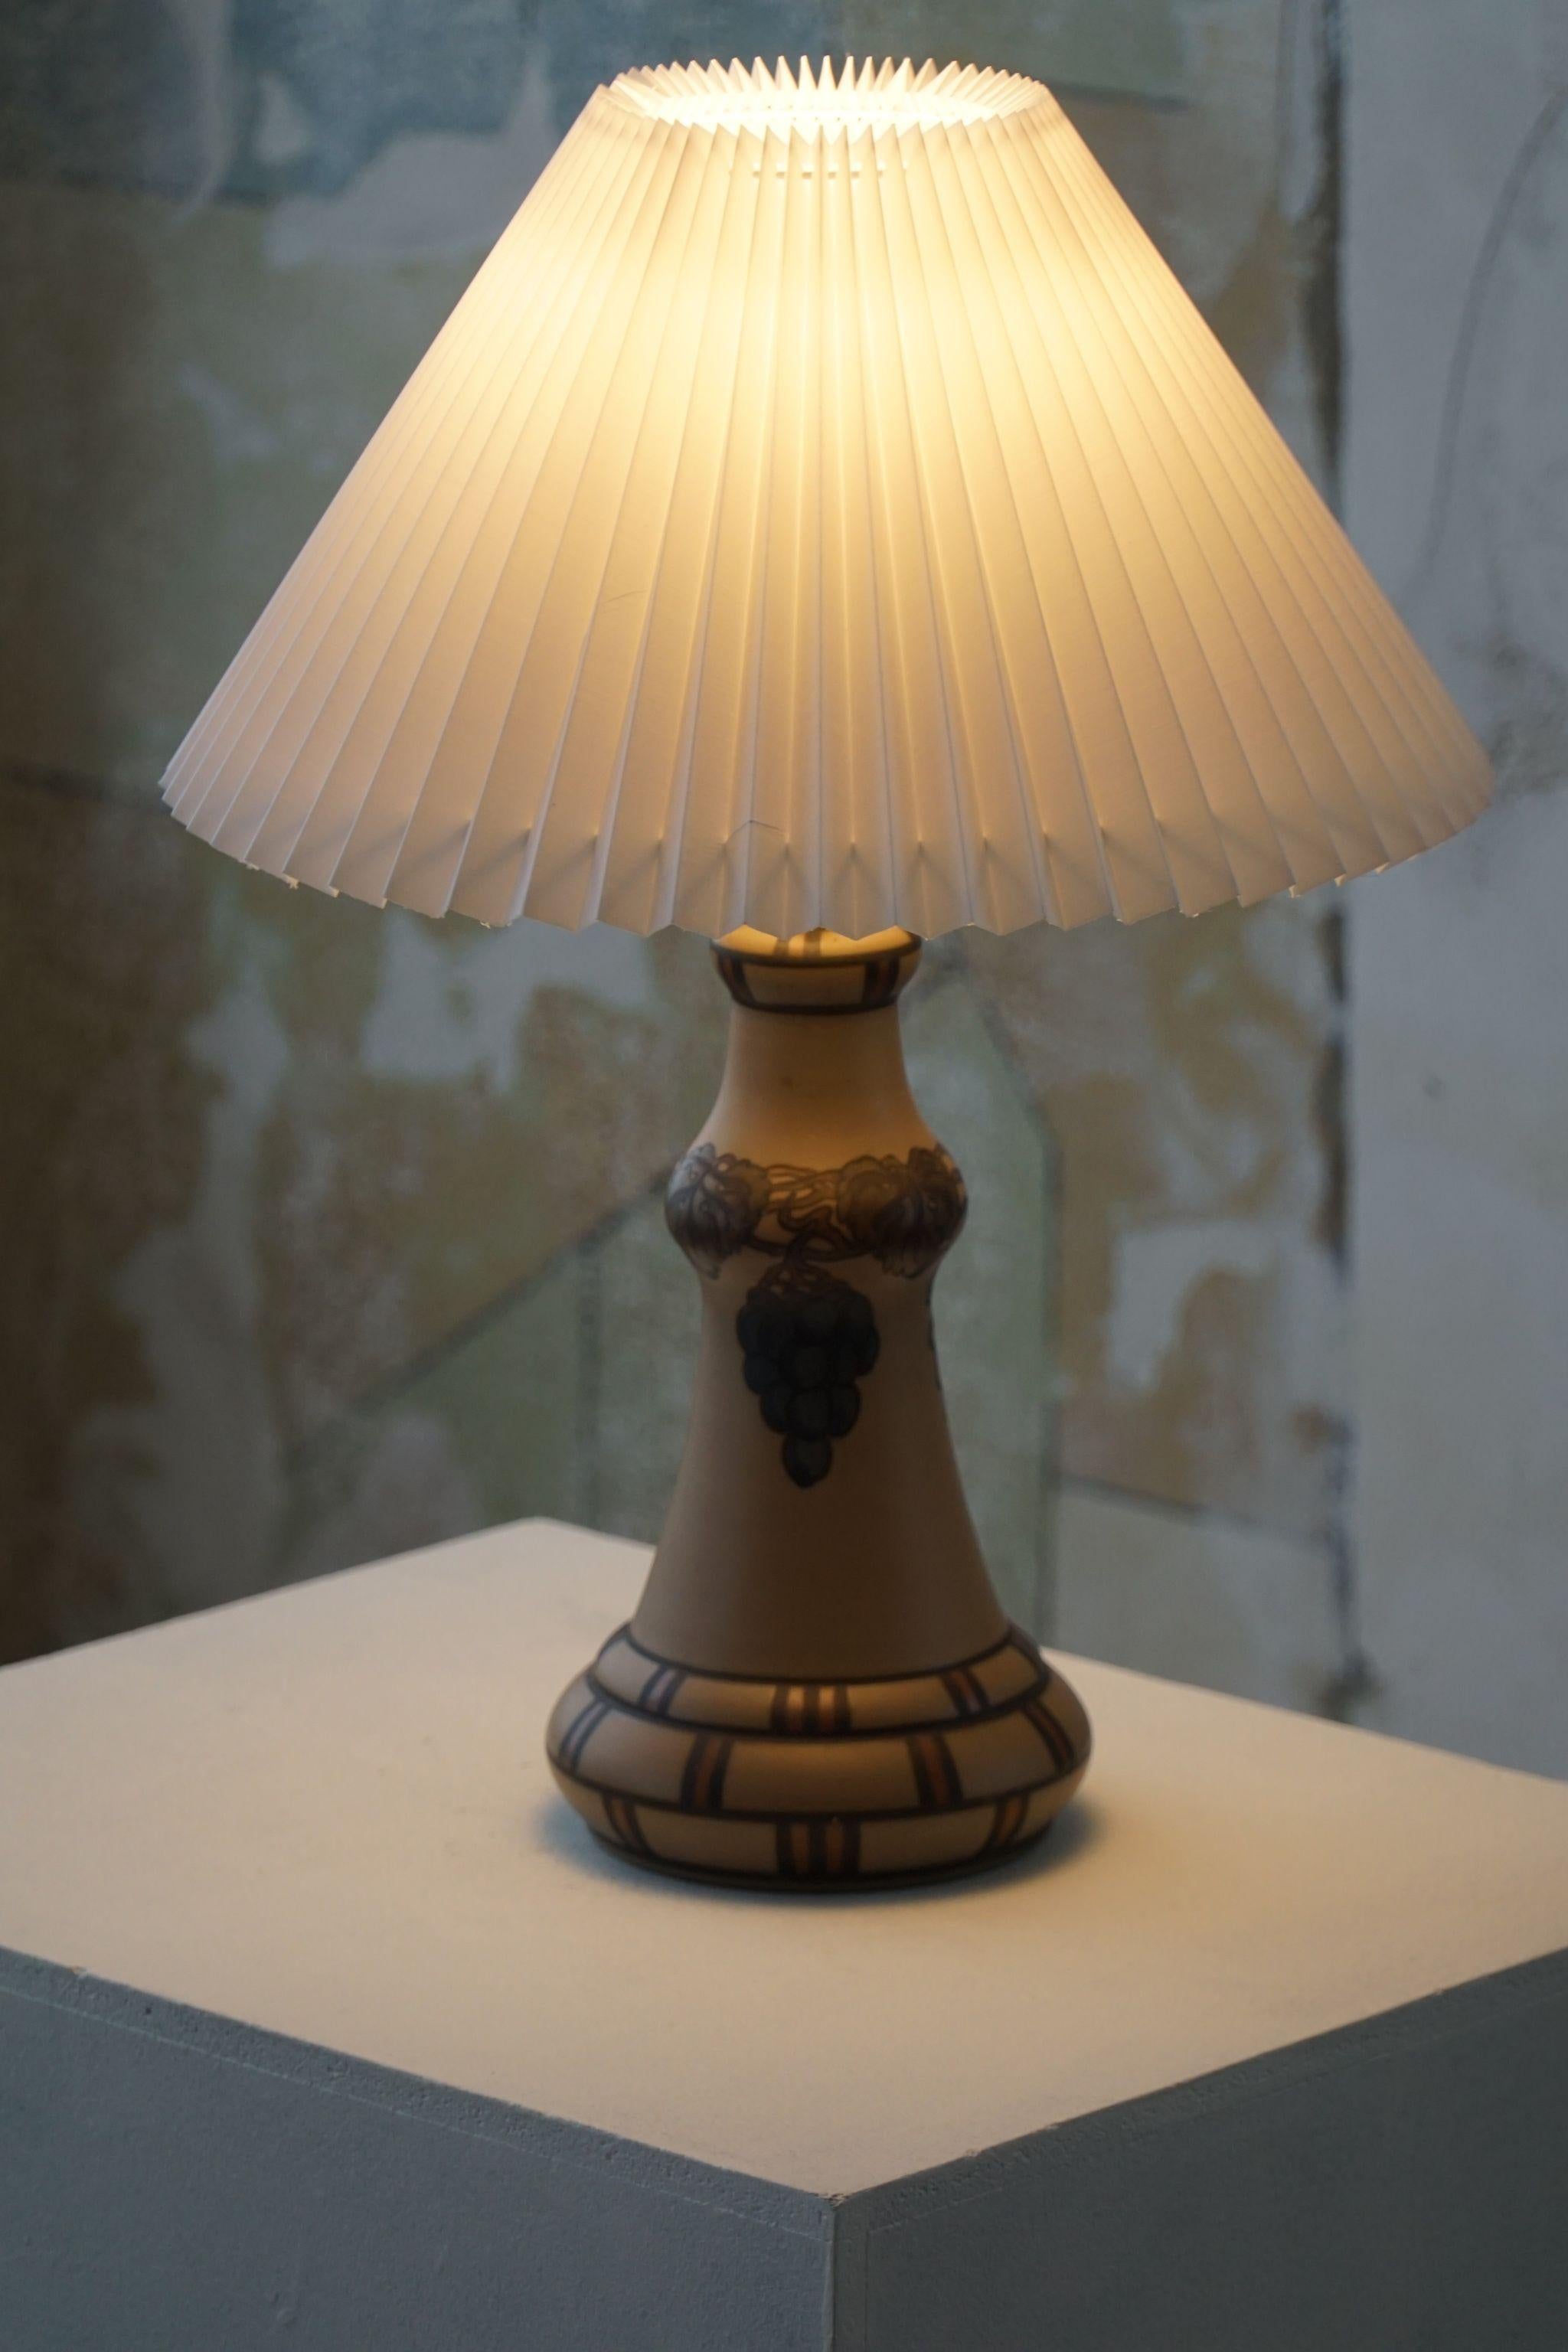 Danish Art Nouveau Table Lamp in Terracotta, Made by L. Hjorth, Bornholm, 1930s 12